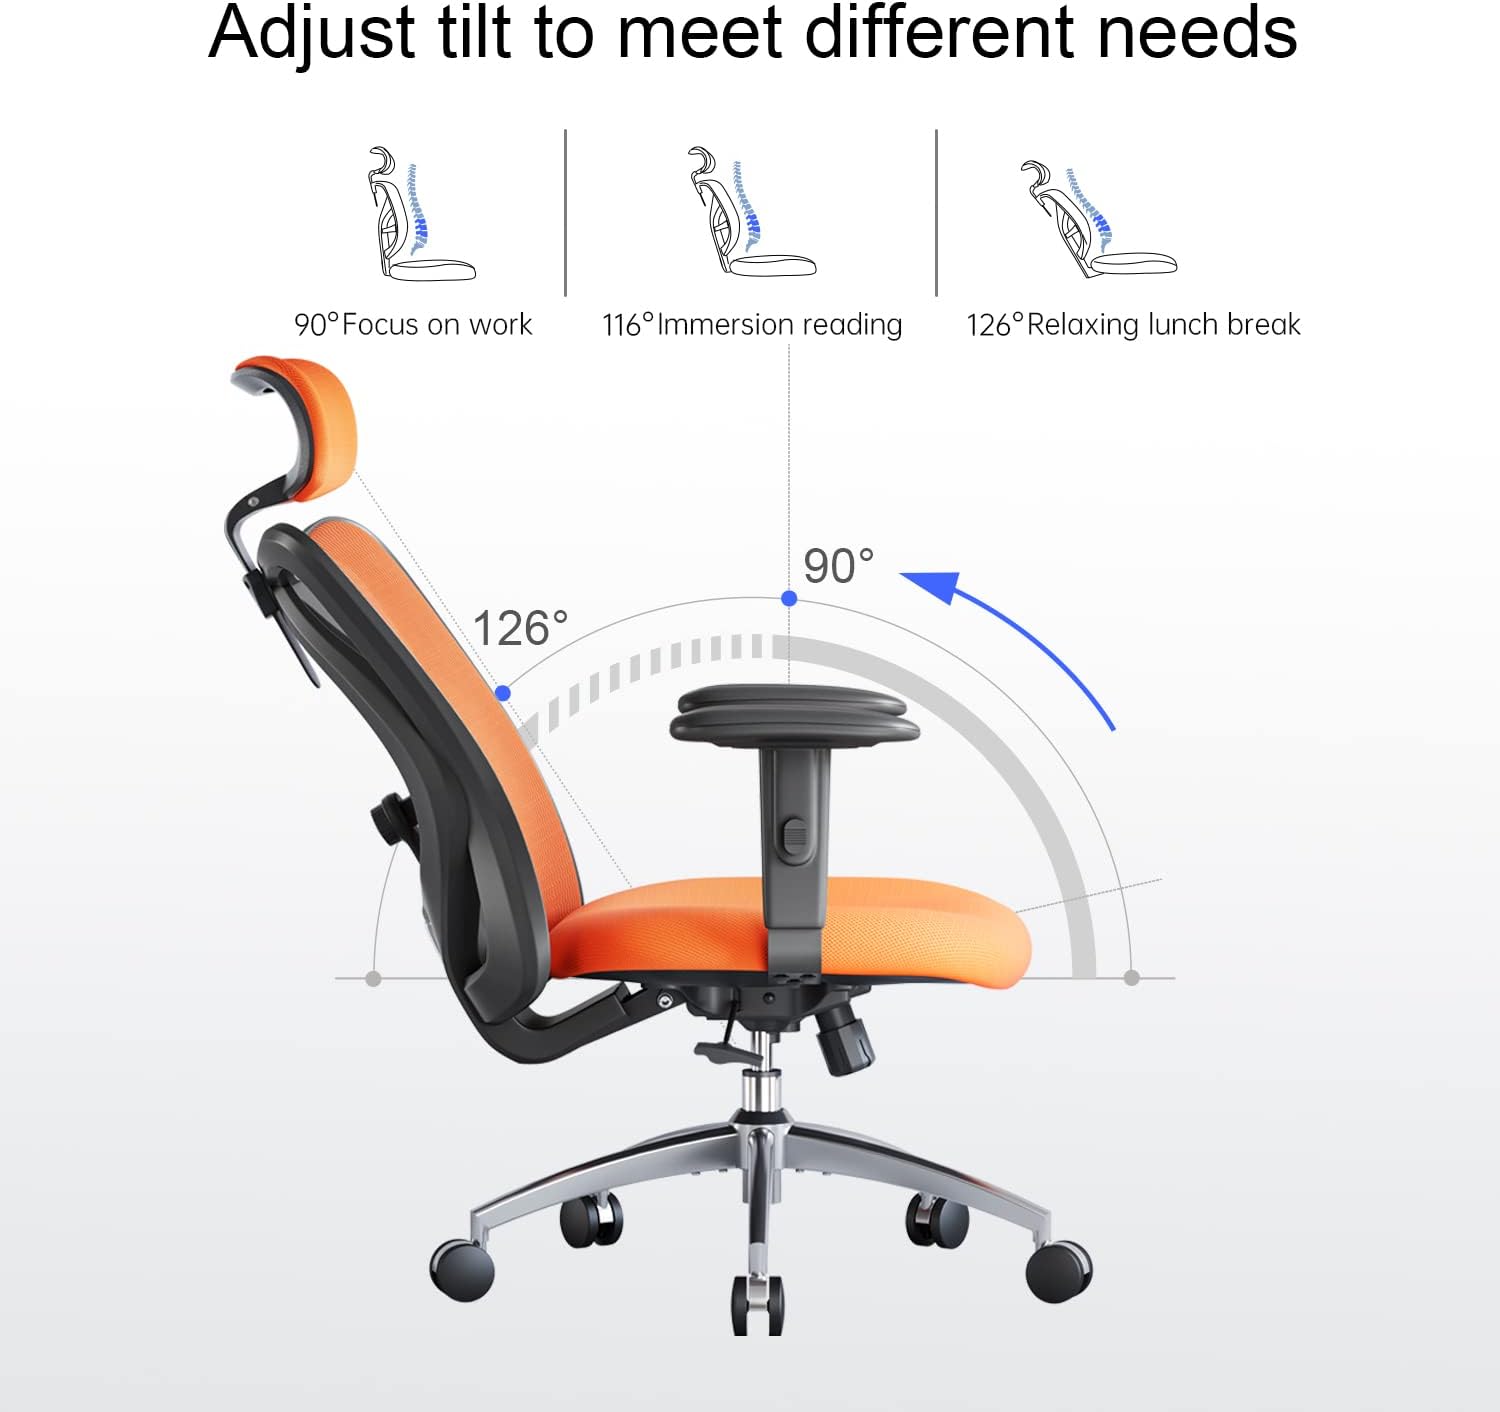 SIHOO M18 Ergonomic Office Chair for Big and Tall People Adjustable  Headrest with 2D Armrest Lumbar Support and PU Wheels Swivel Tilt Function  Orange